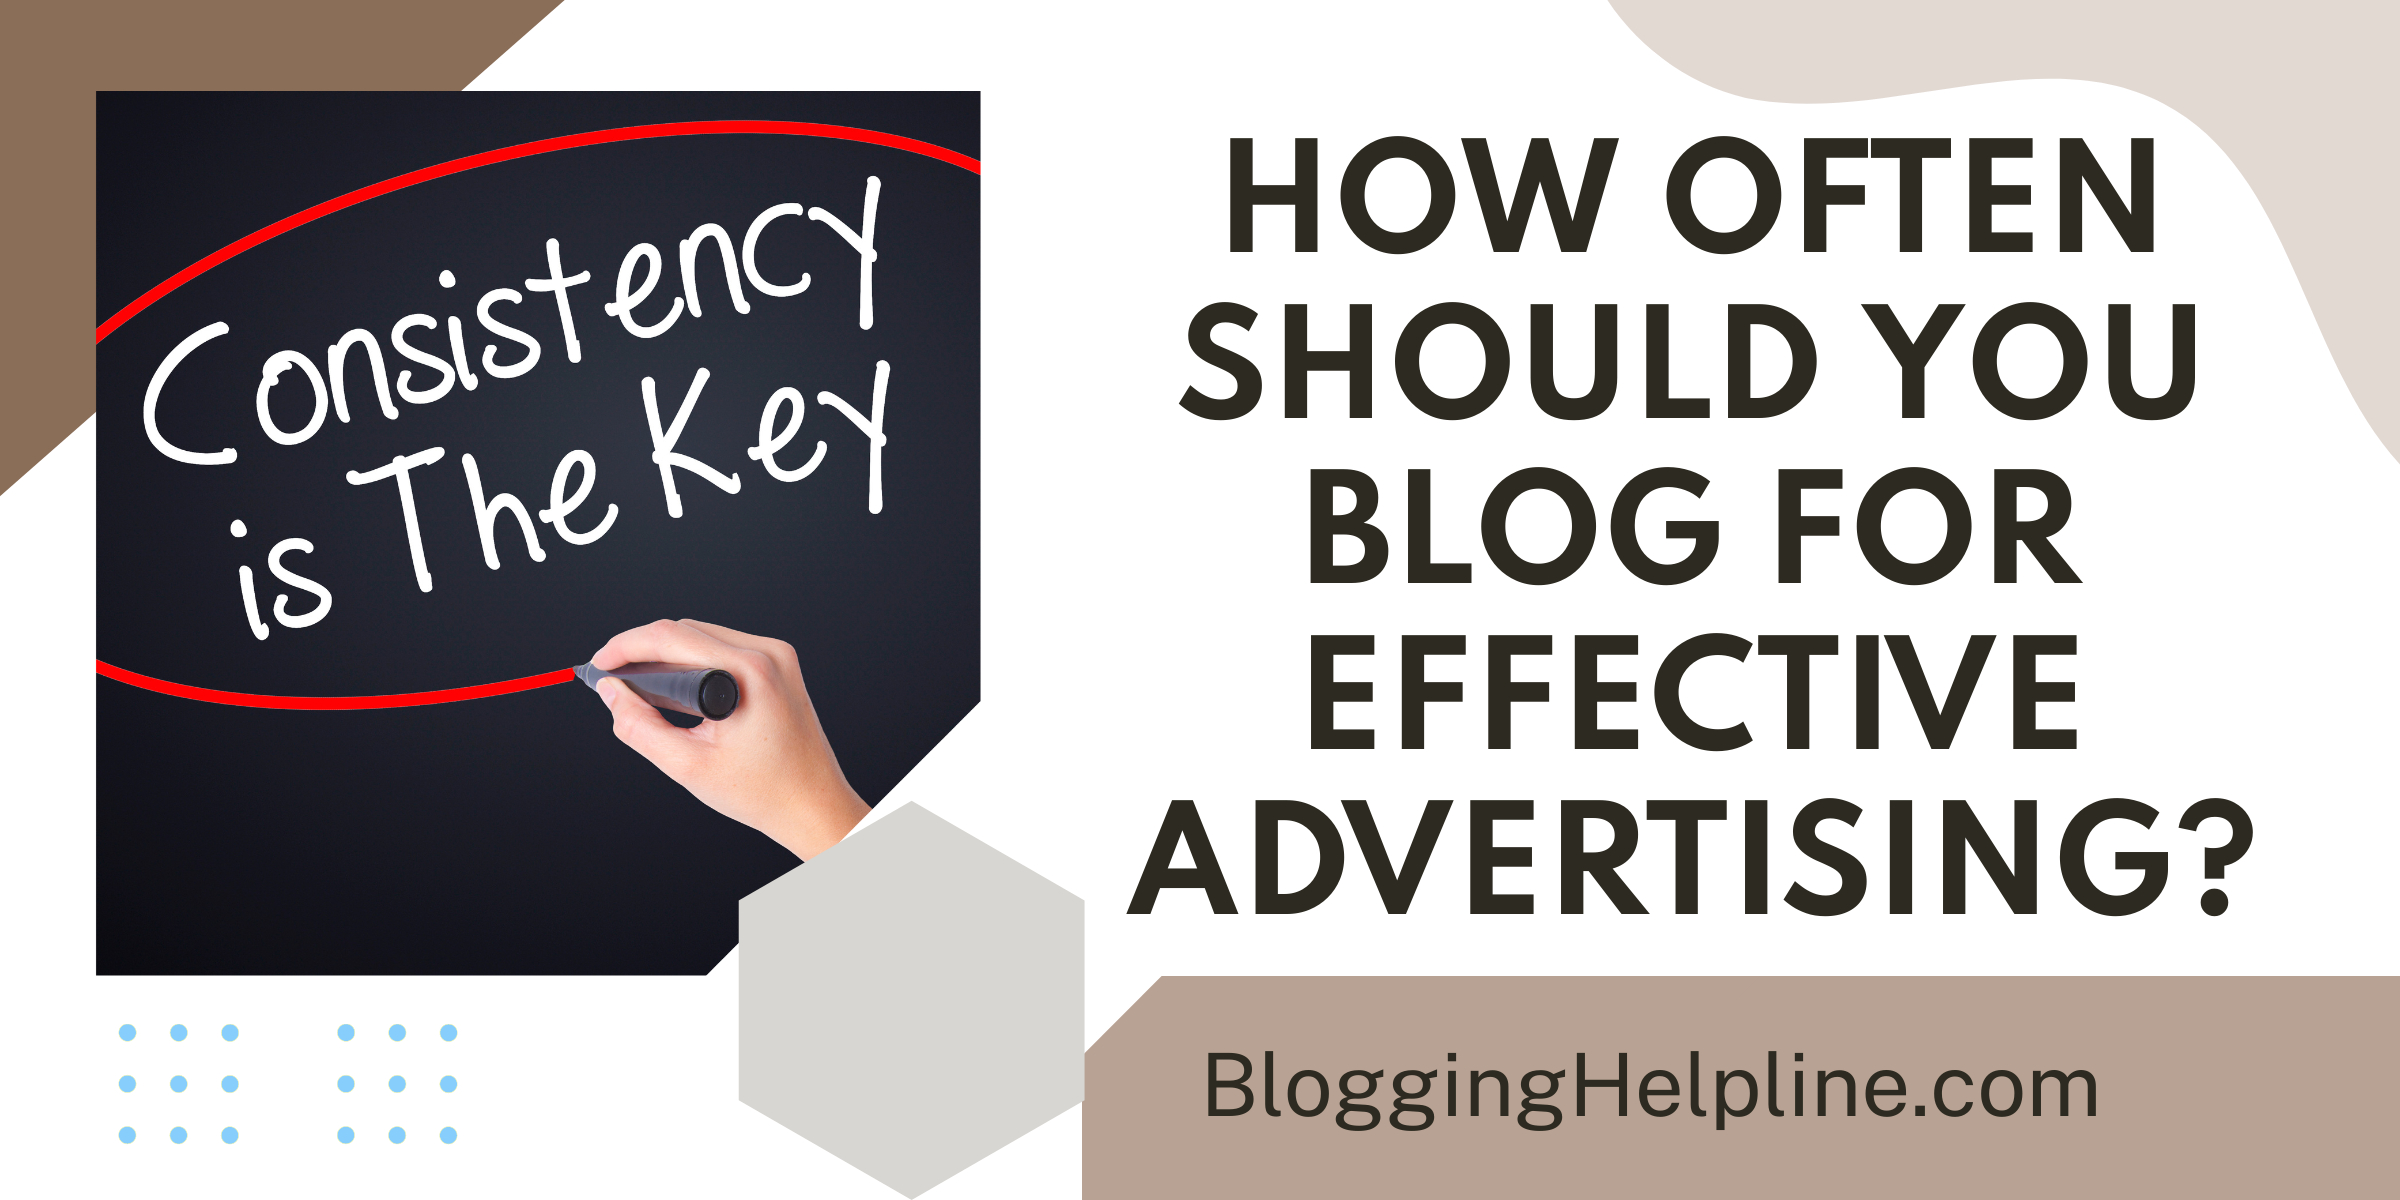 How Often Should You Blog for Effective Advertising